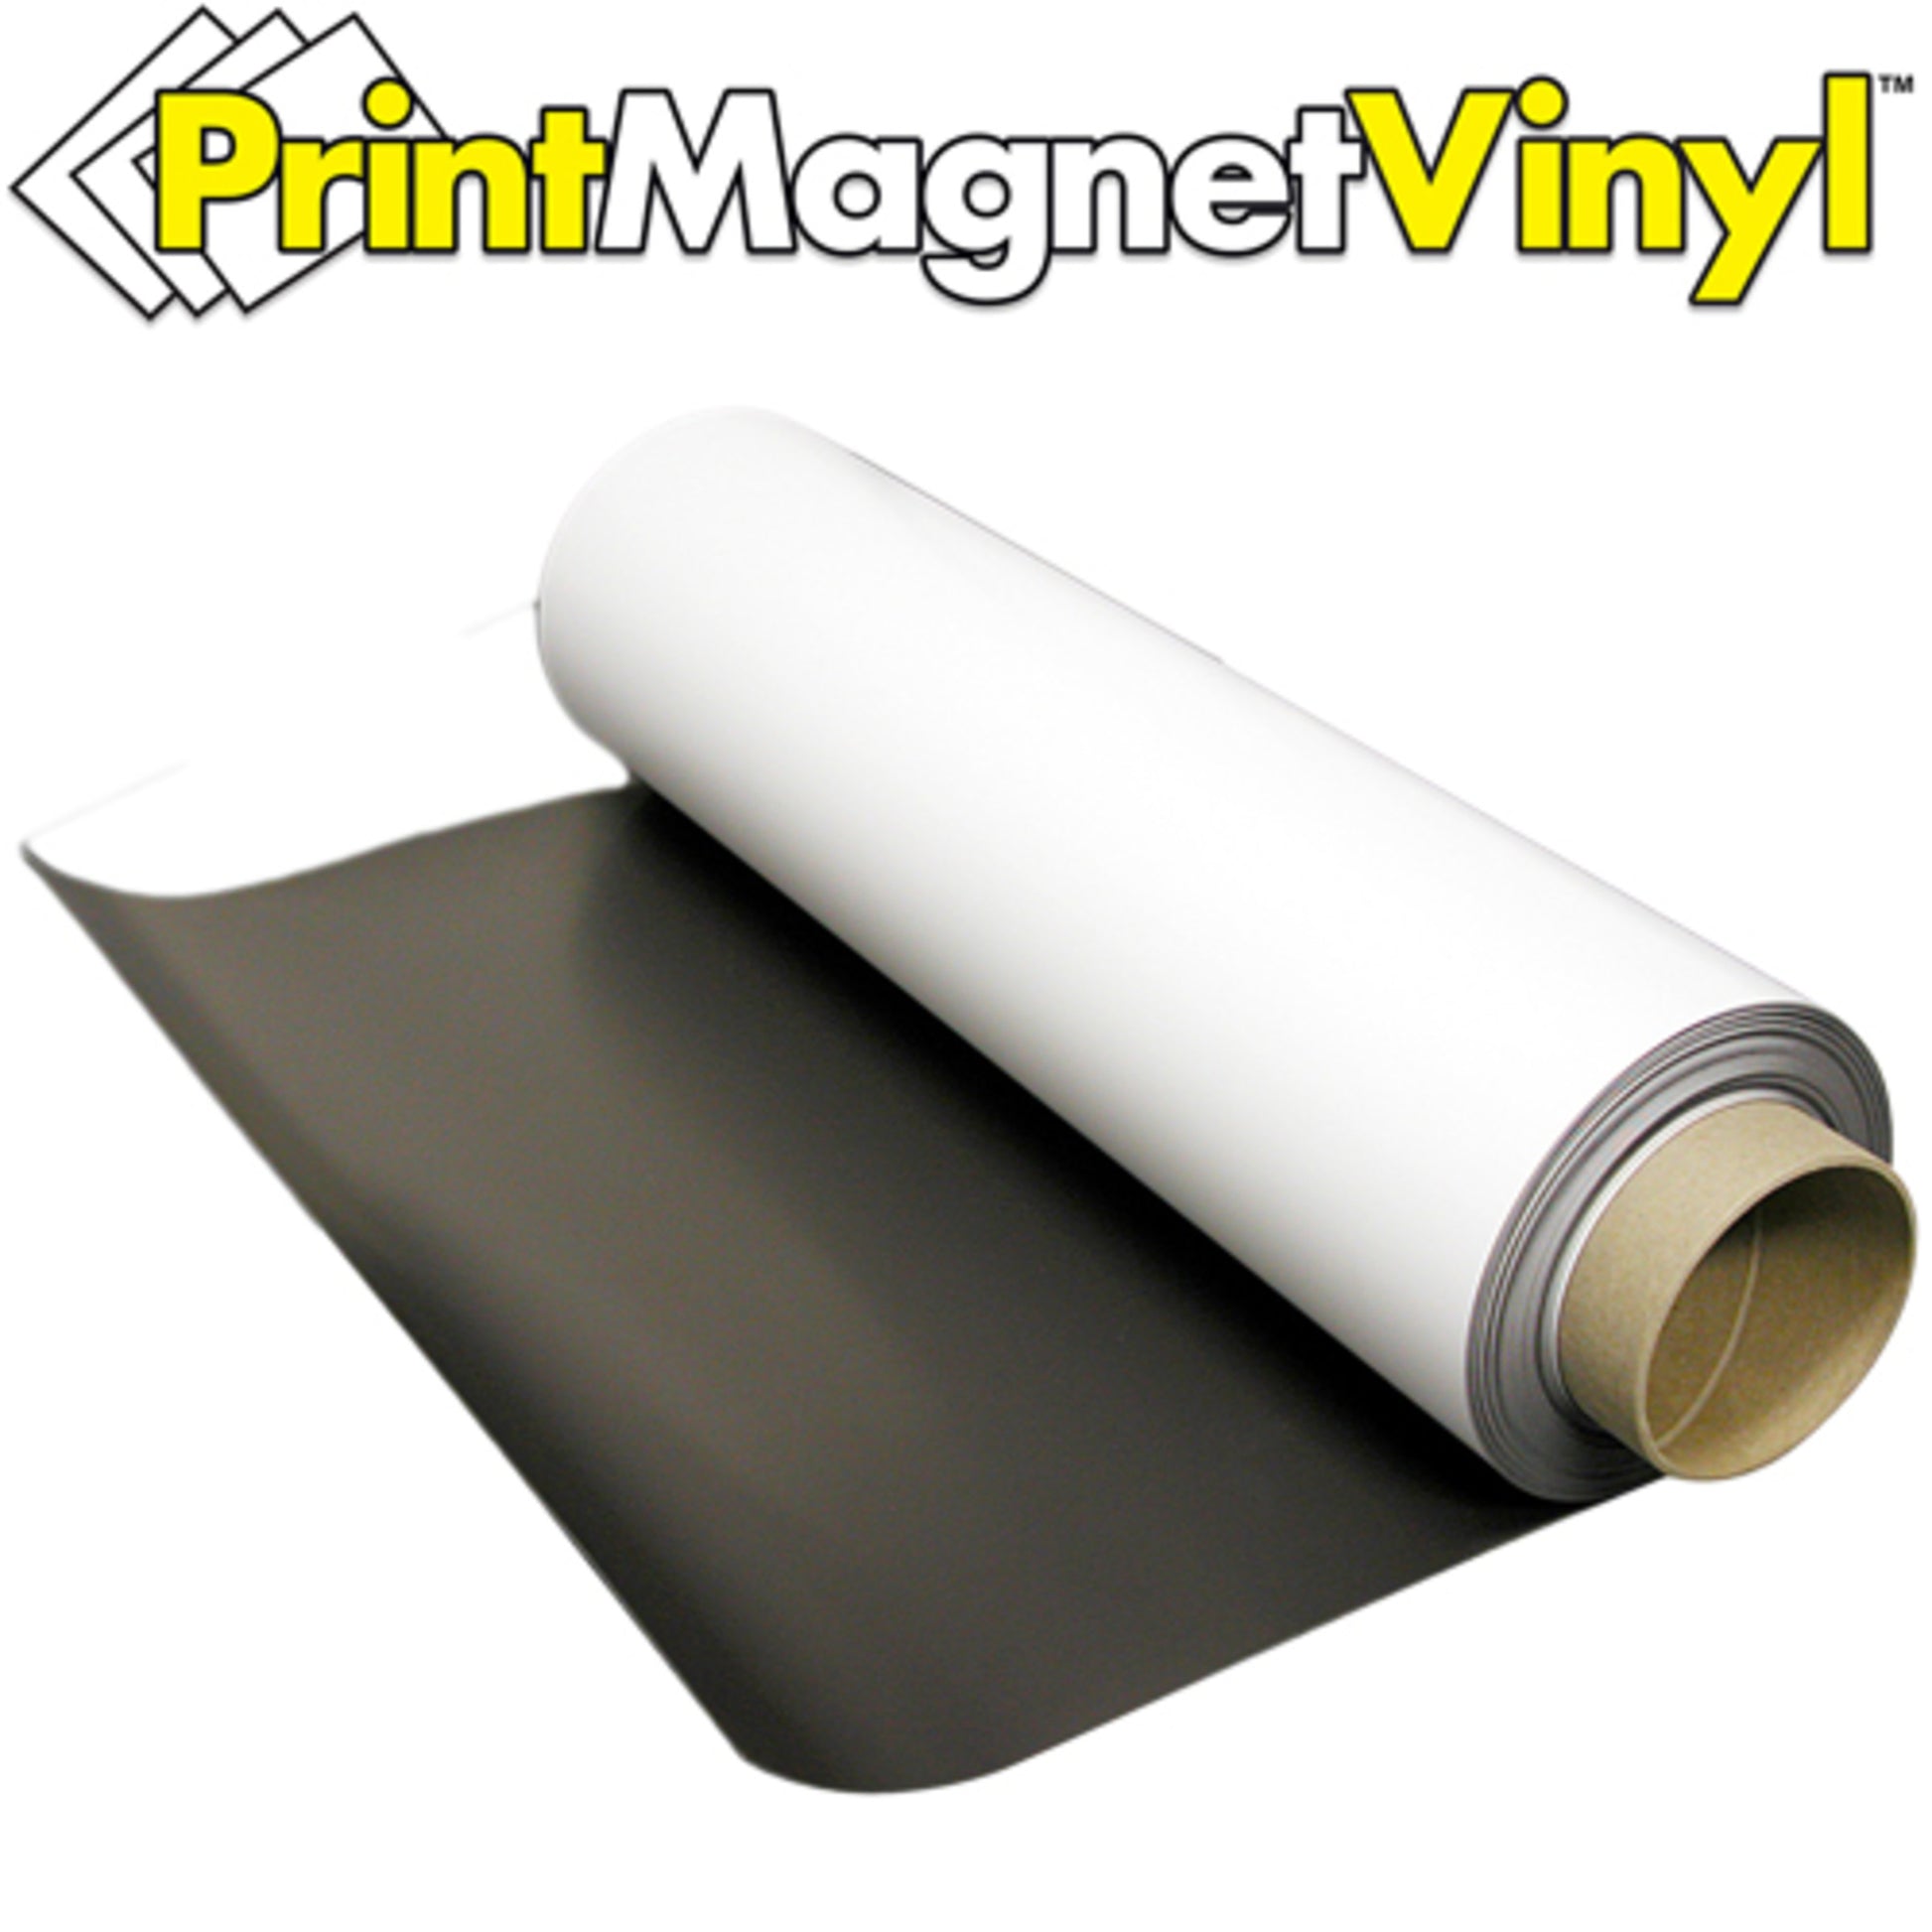 Load image into Gallery viewer, ZGN6024GW10 PrintMagnetVinyl™ Flexible Magnetic Sheet - 45 Degree Angle View